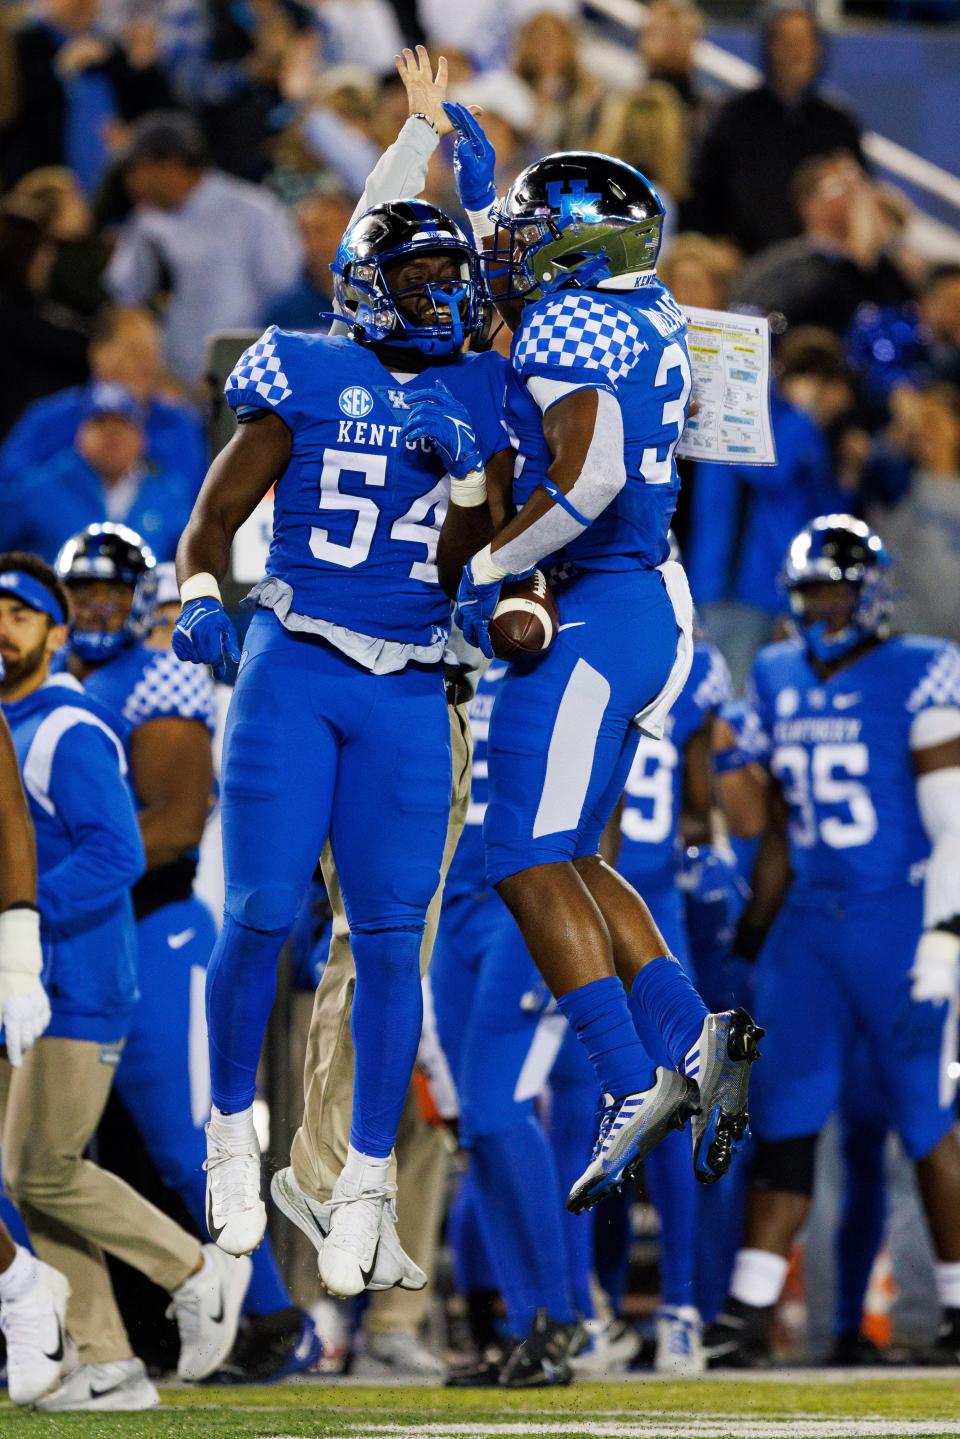 Kentucky linebacker D'Eryk Jackson (54) celebrates with linebacker Trevin Wallace (32) after forcing a turnover by South Carolina during the first half of an NCAA college football game in Lexington, Ky., Saturday, Oct. 8, 2022. (AP Photo/Michael Clubb)